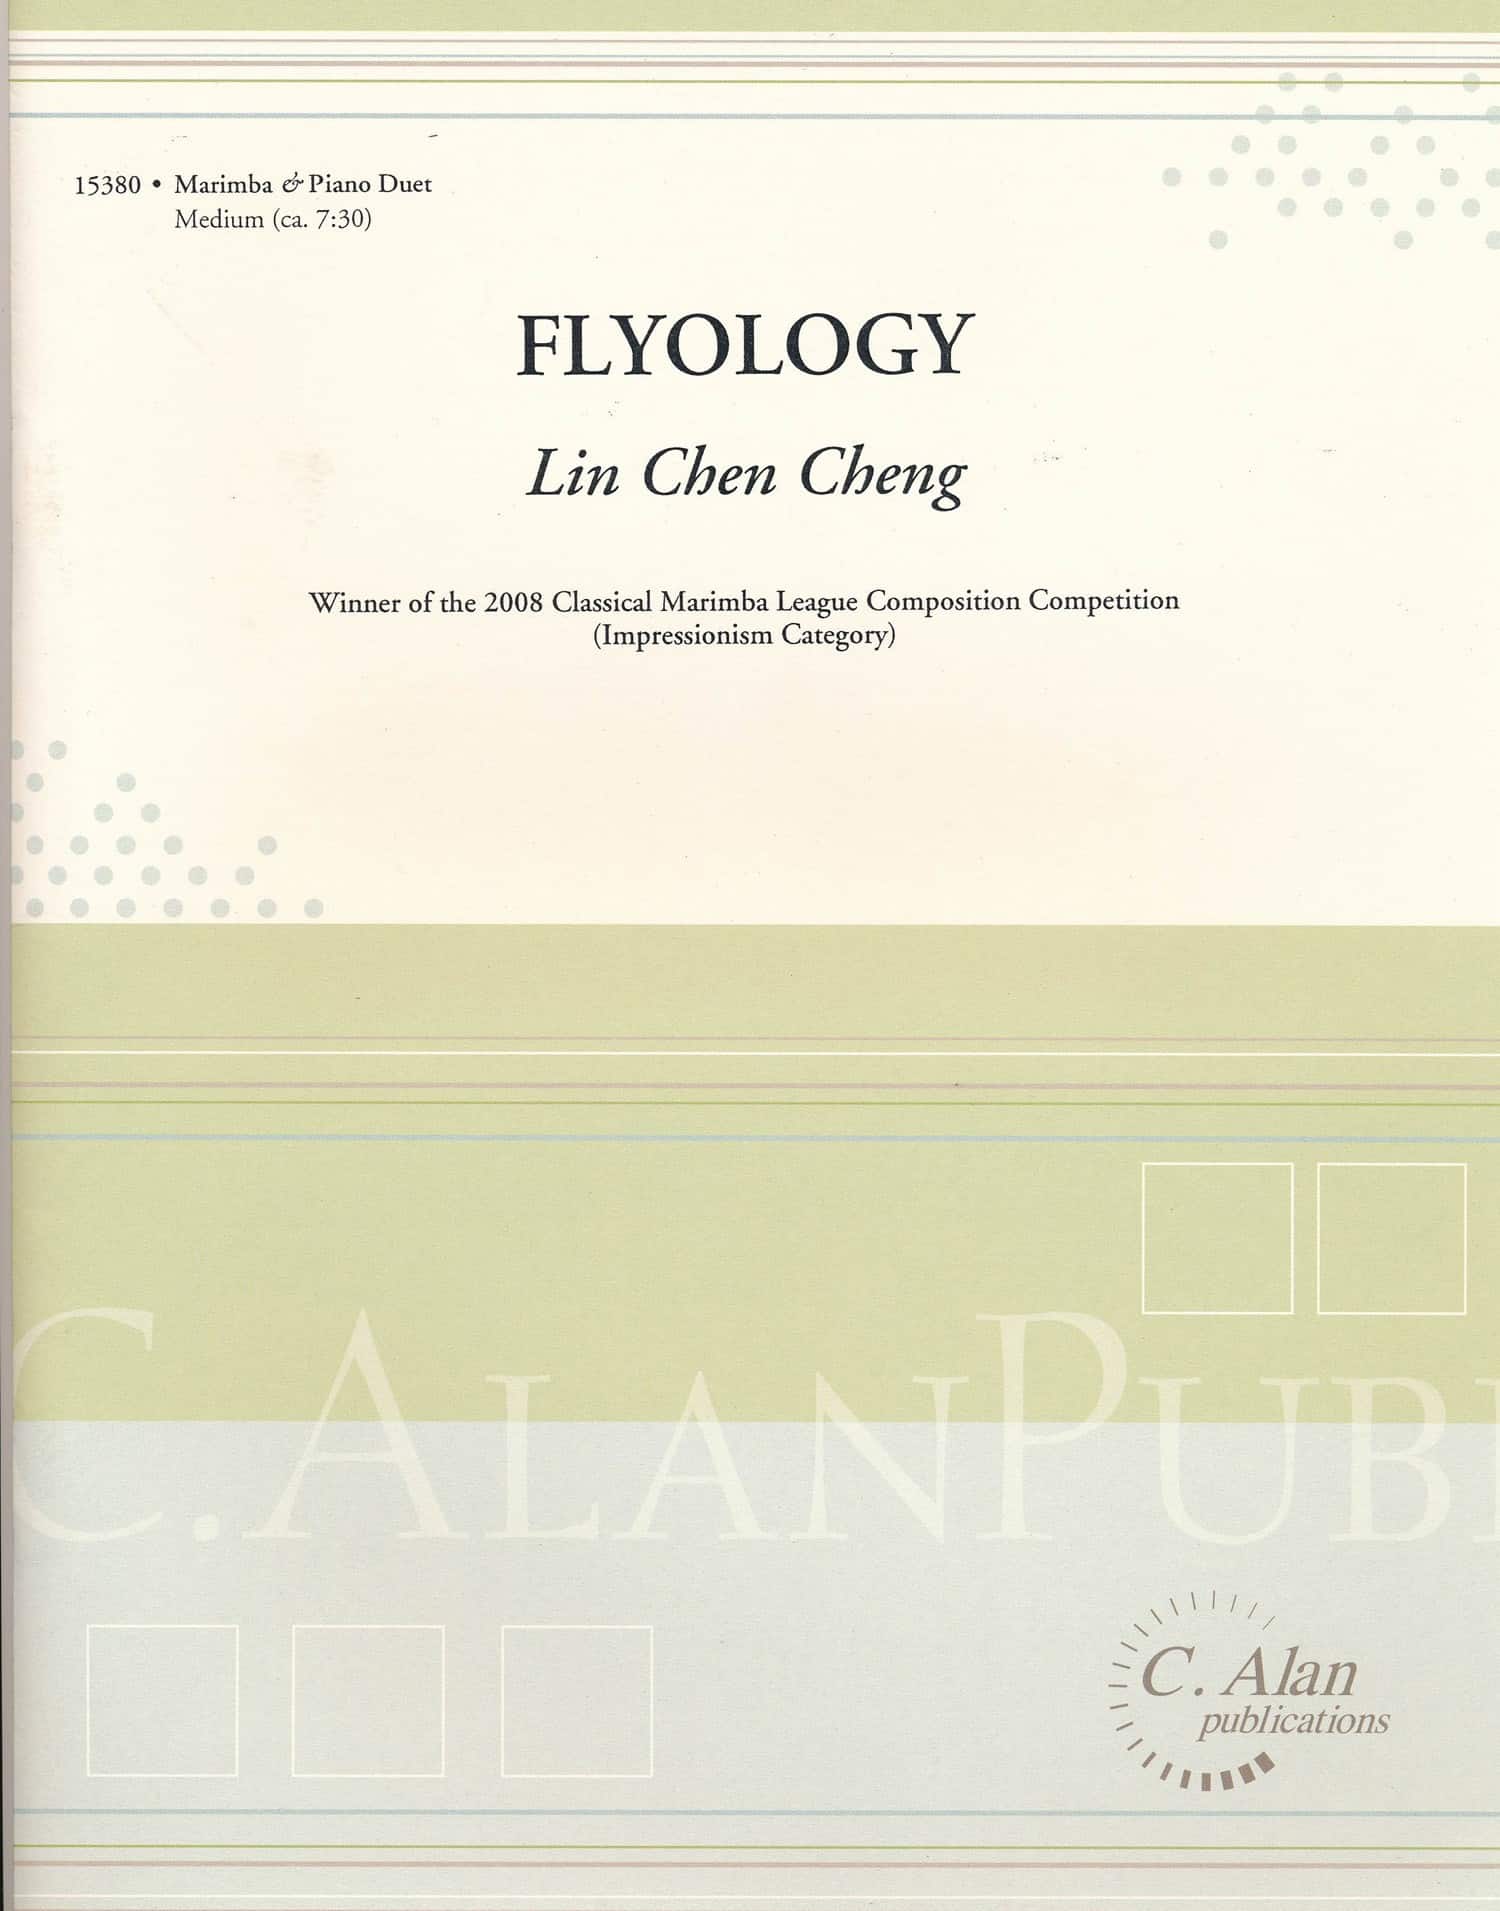 Flyology by Lin Chin-Cheng